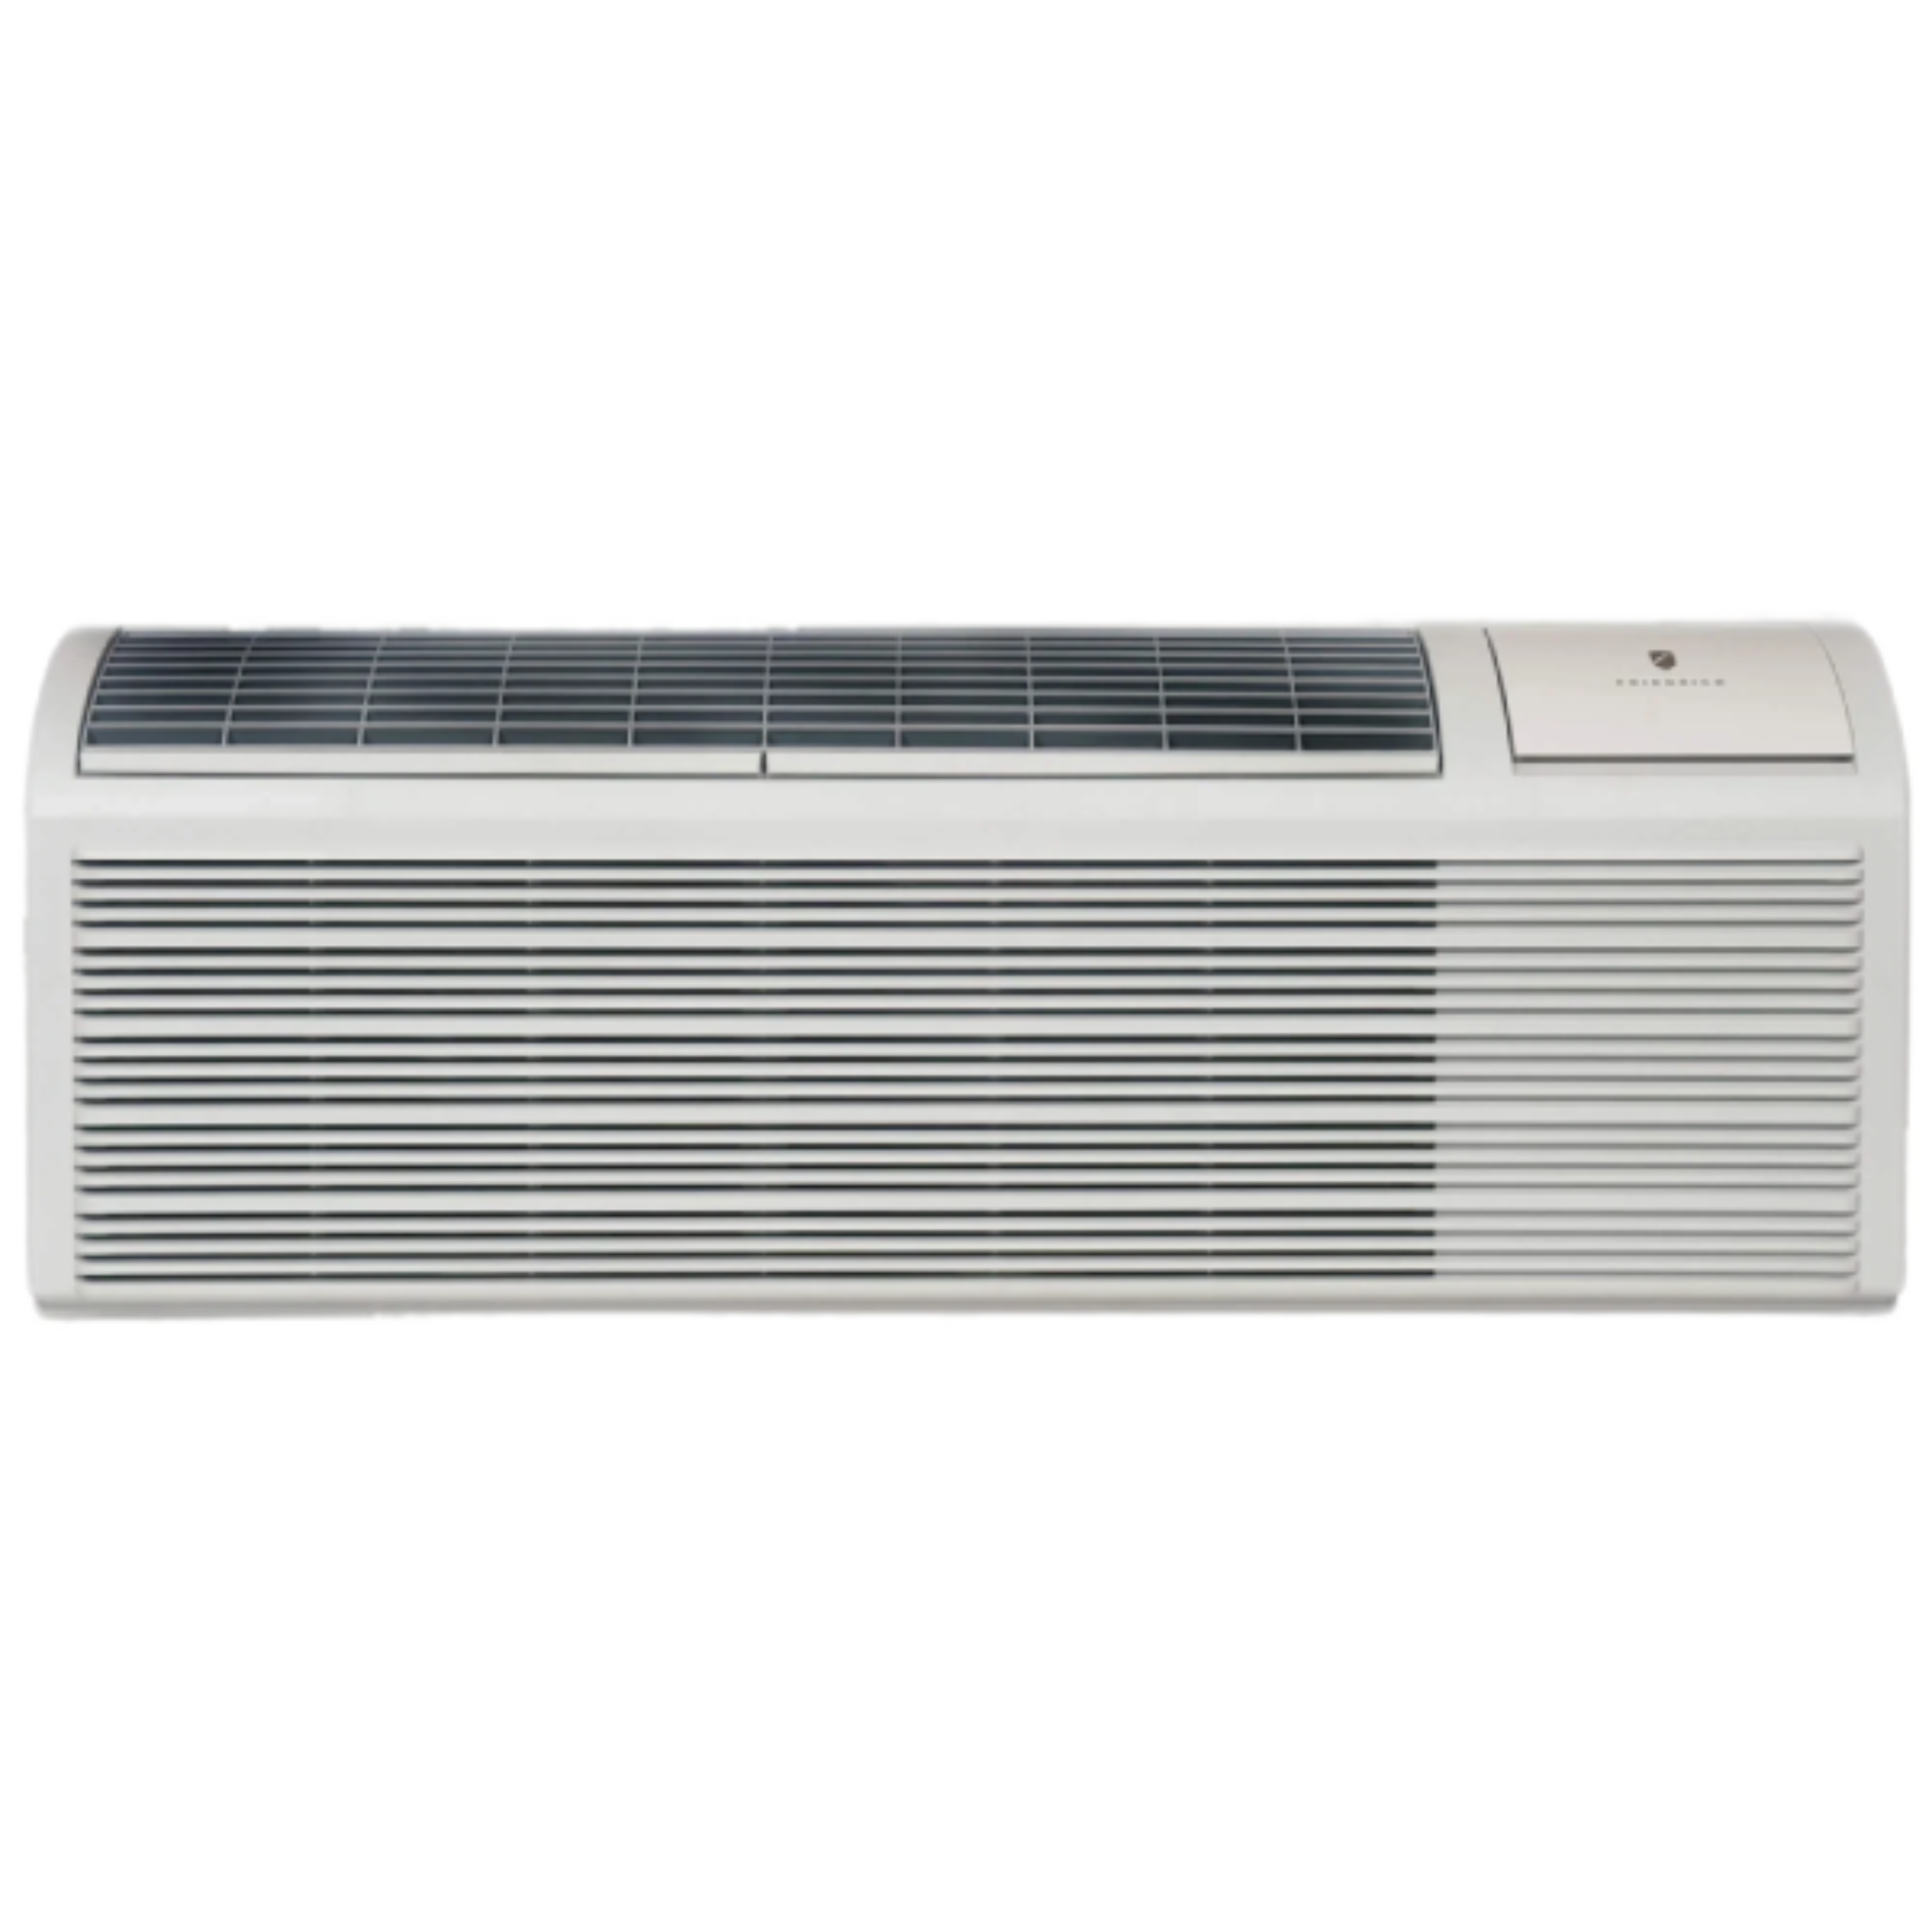 Friedrich ZoneAire Select Packaged Terminal Air Conditioner with Electric Heat Model PZE07K3SB, 12.0 EER, 230 V, 335 CFM, 7200 BTU